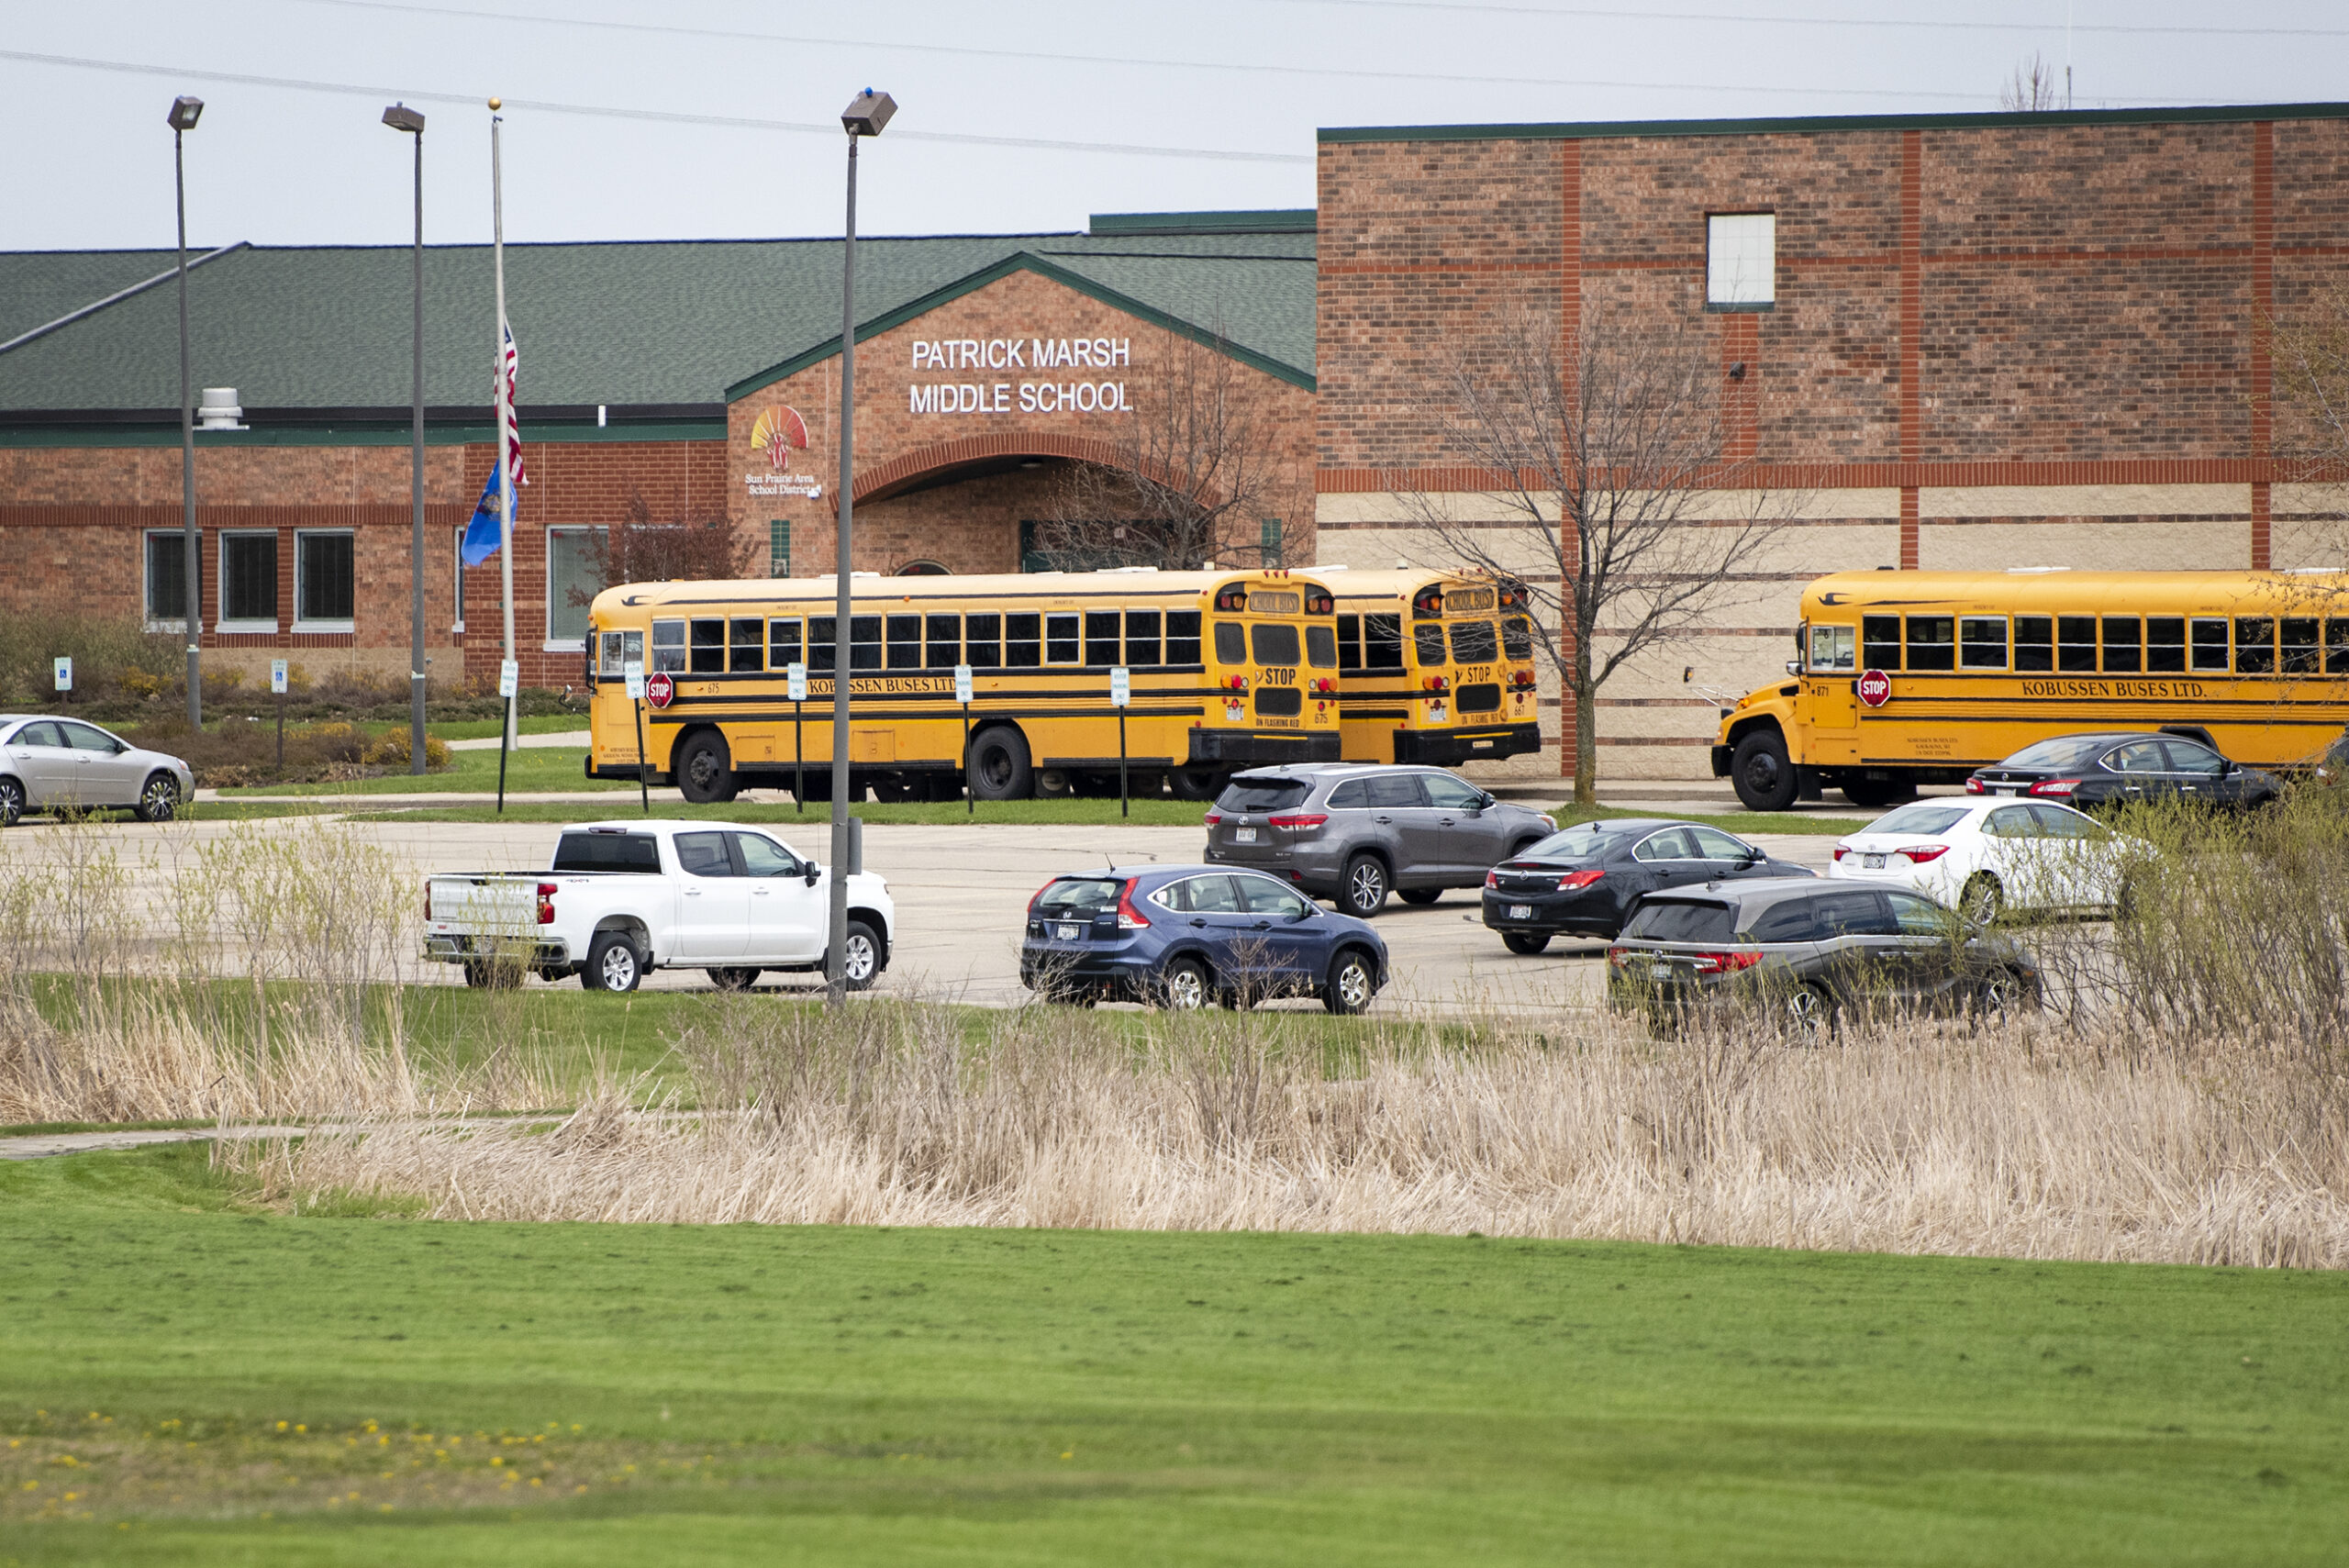 Three yellow school buses are parked in front of a brick school building.